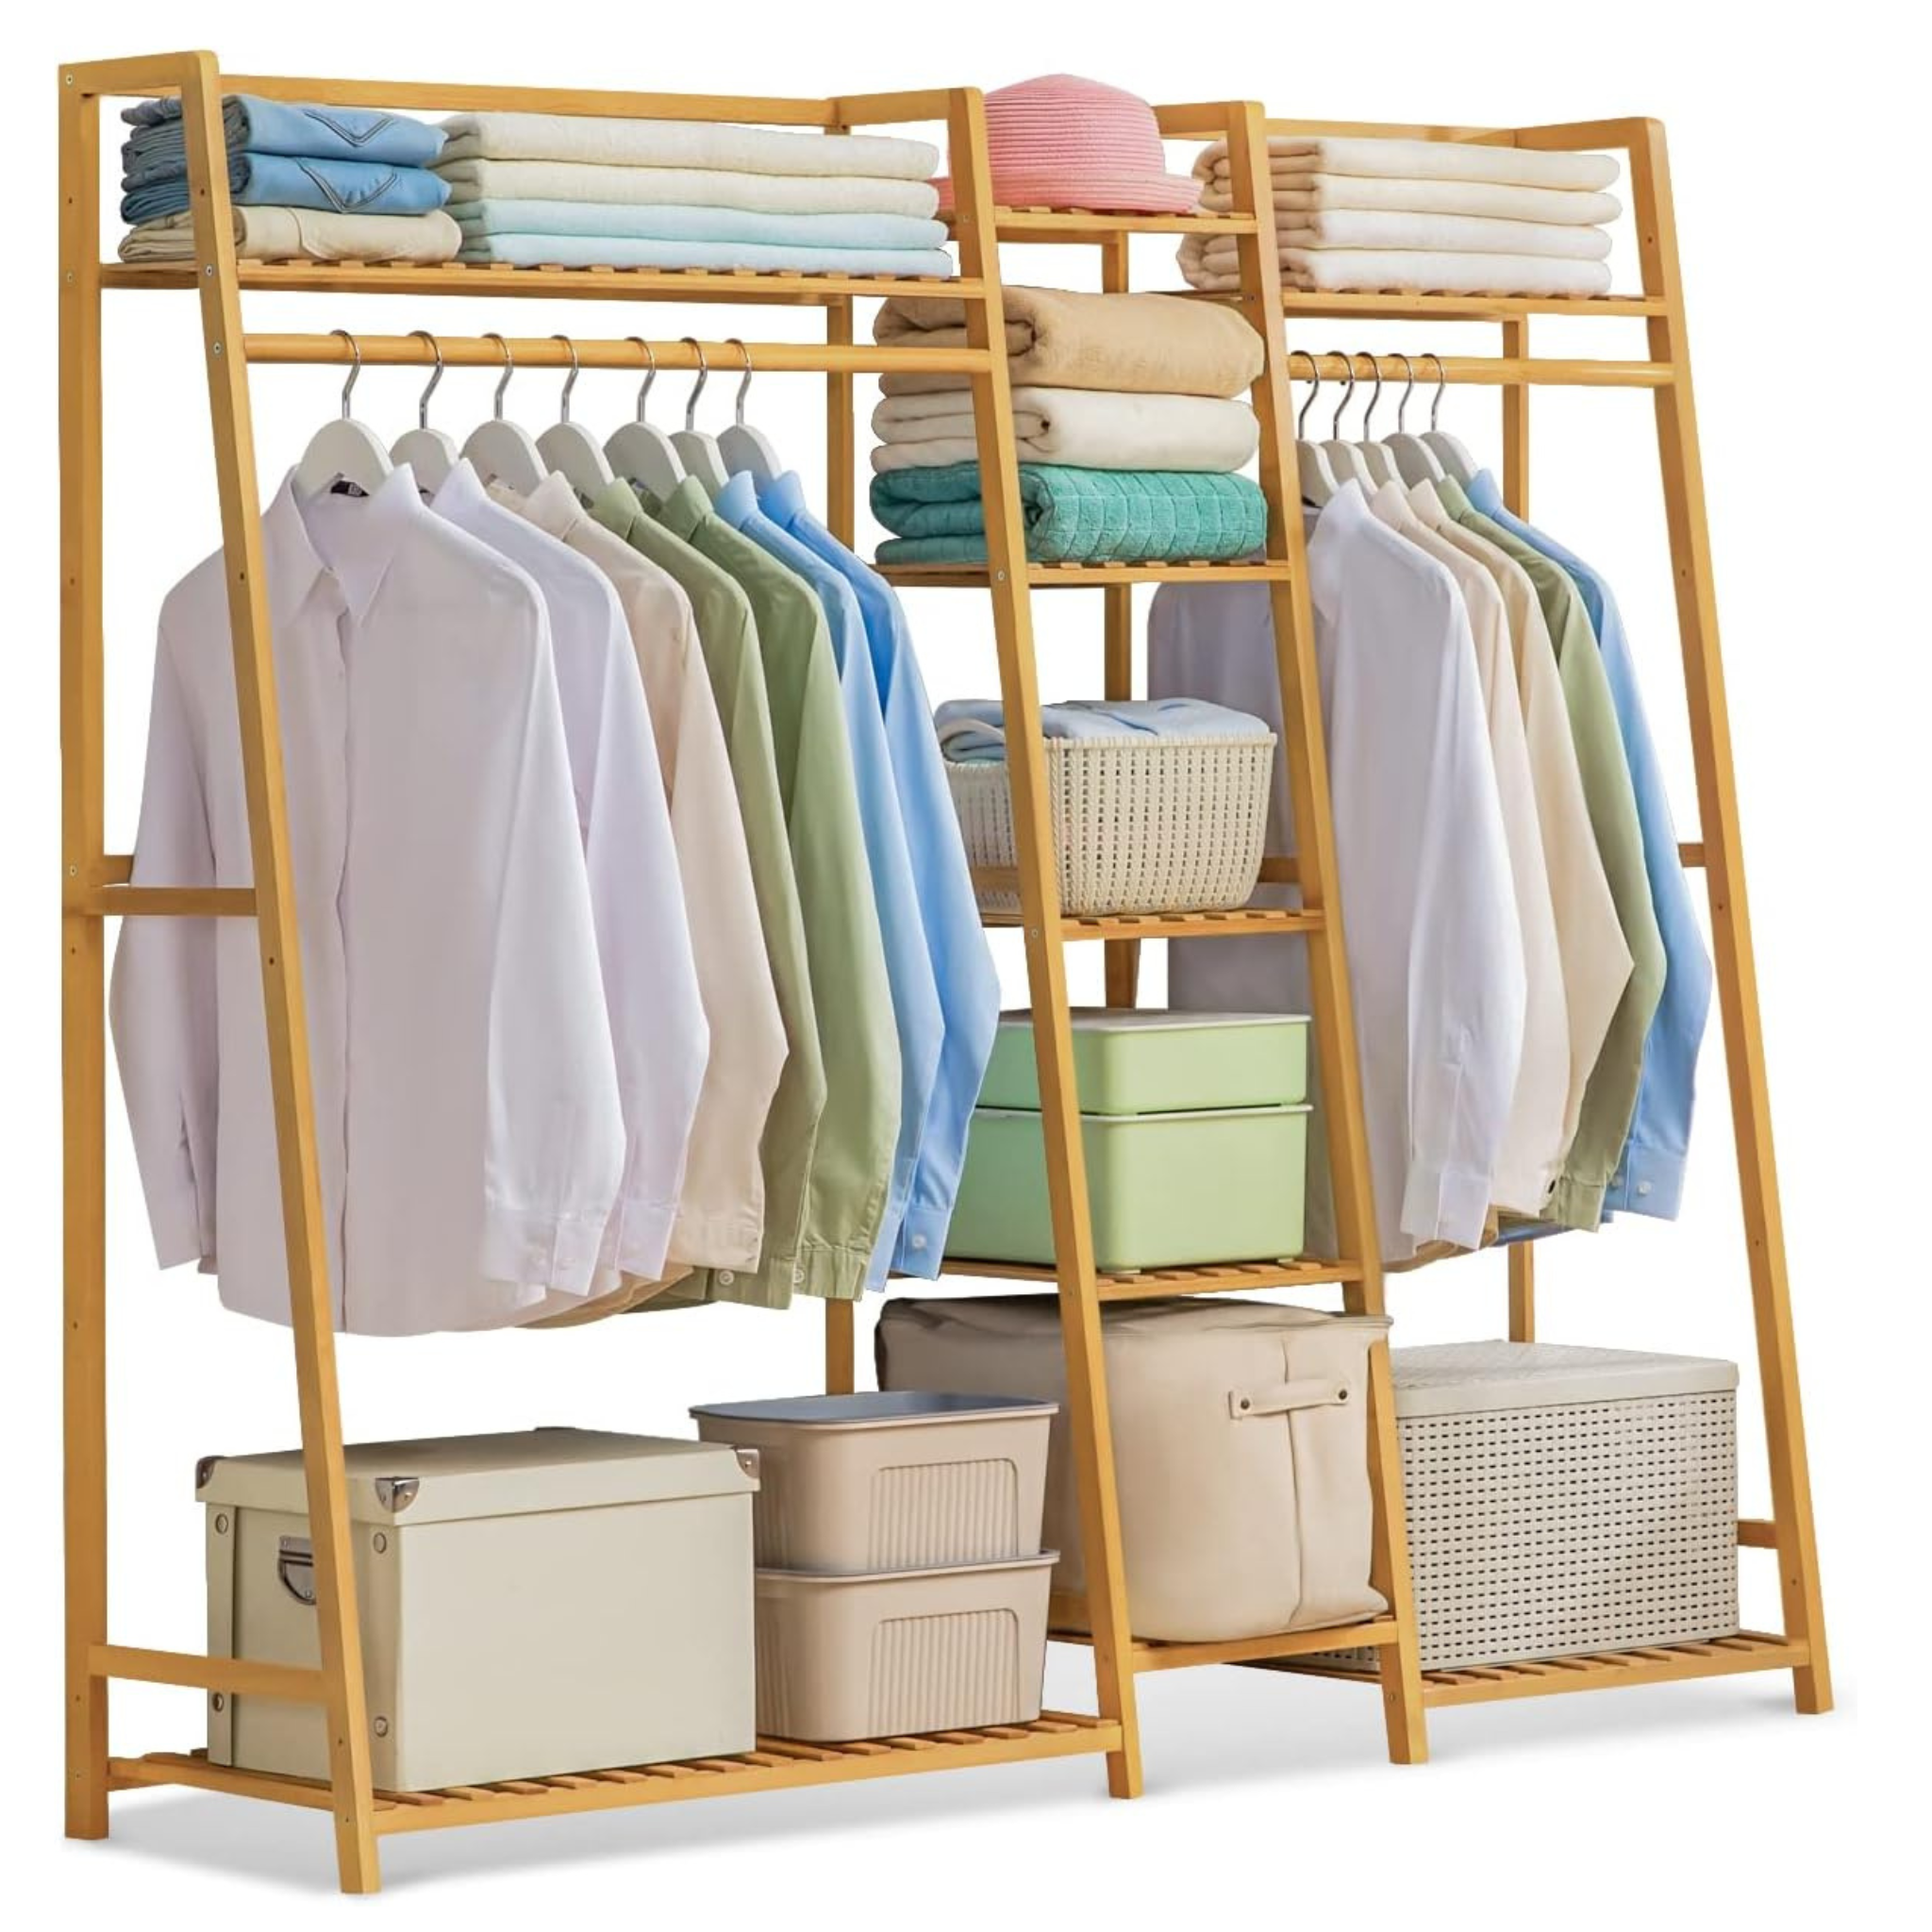 MoNiBloom Bamboo Trapezoid Clothing Rack with 5-Tier Storage Shelves